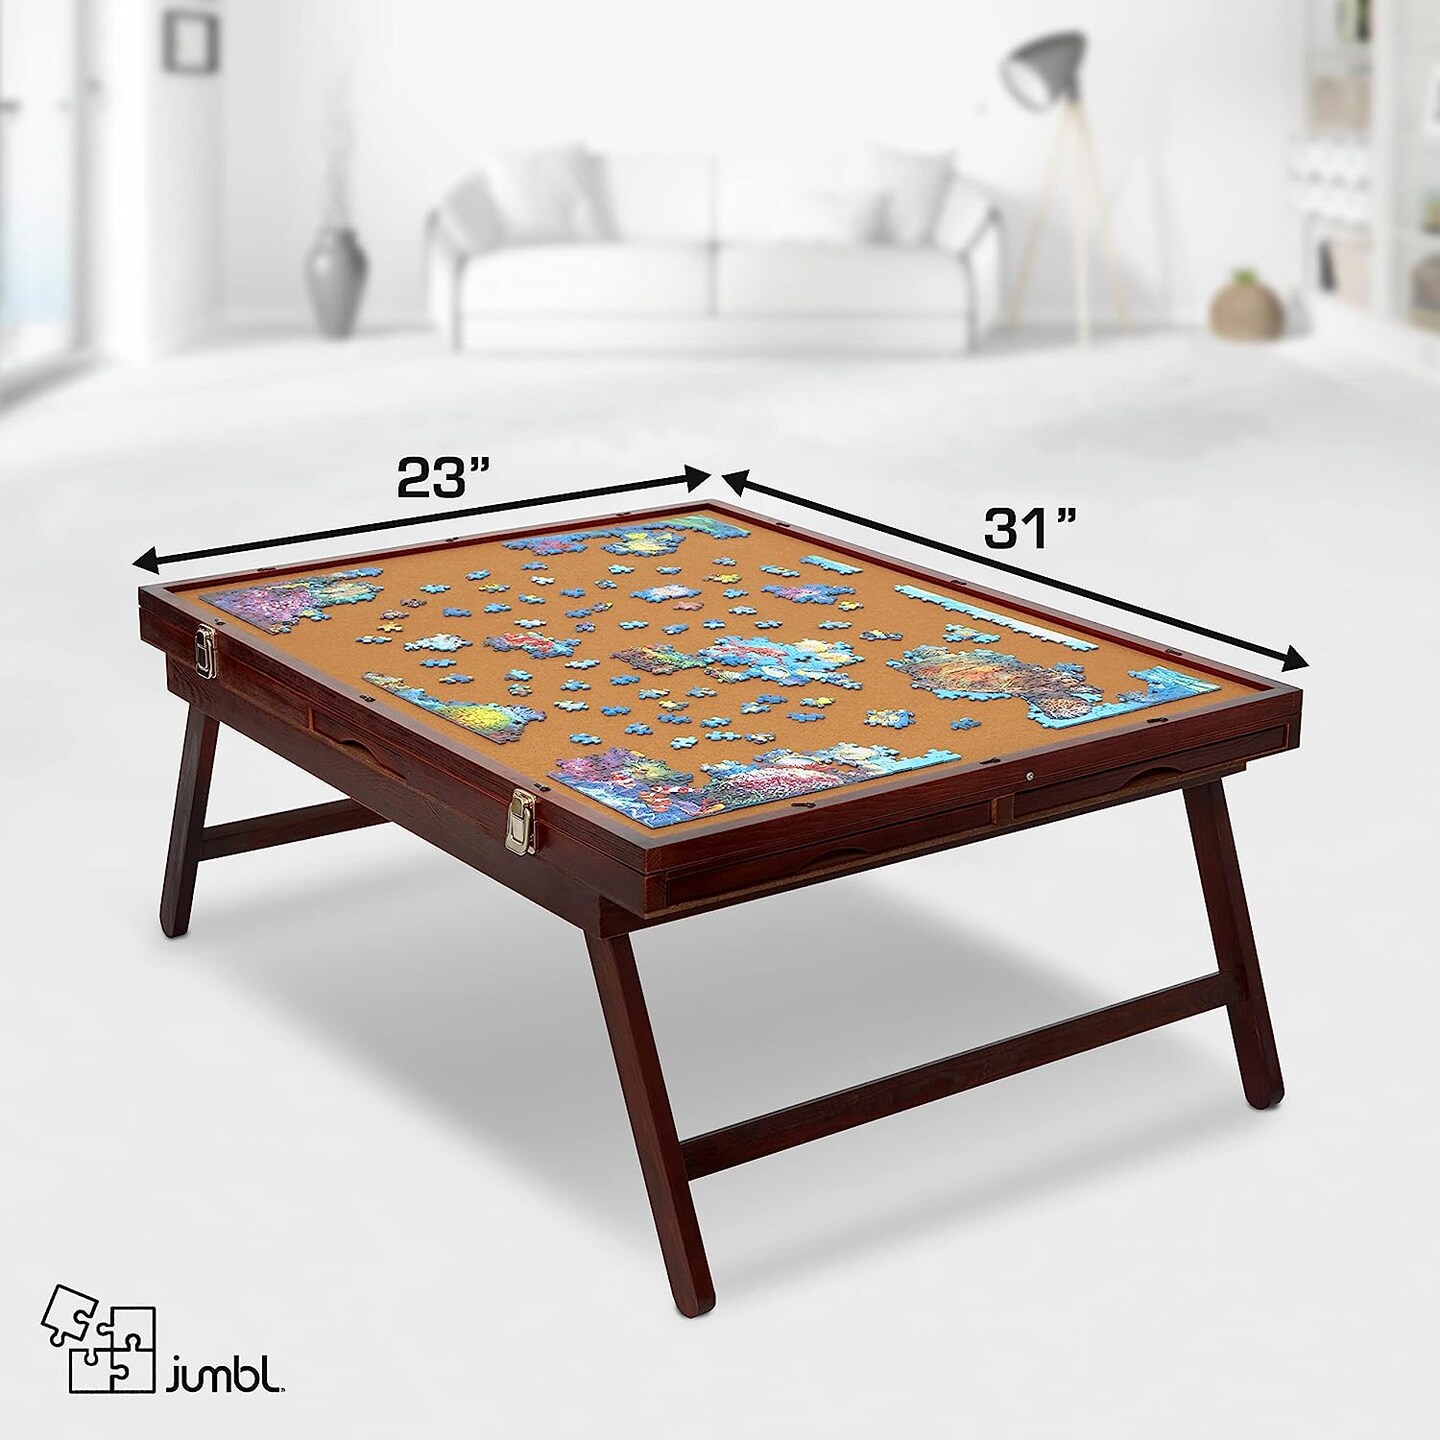 Jumbl 1000 Piece Puzzle Board, 23” x 31” Wooden Jigsaw Puzzle Table Board  w/Felt Surface & Storage Drawers